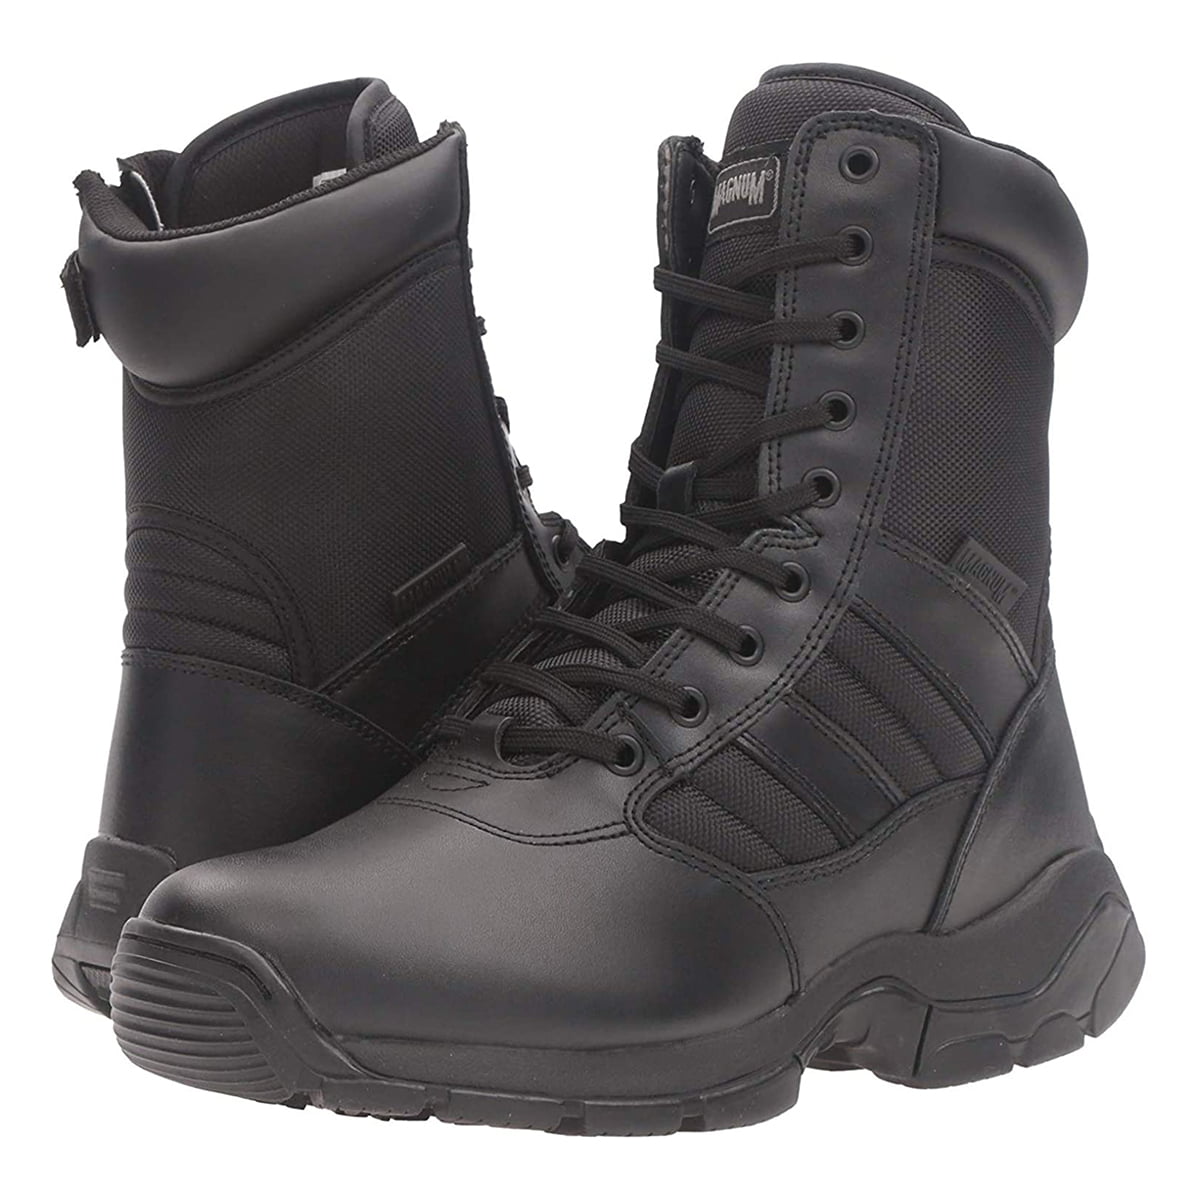 MAGNUM Panther 8.0 SB black leather/mesh steel toe combat safety boot